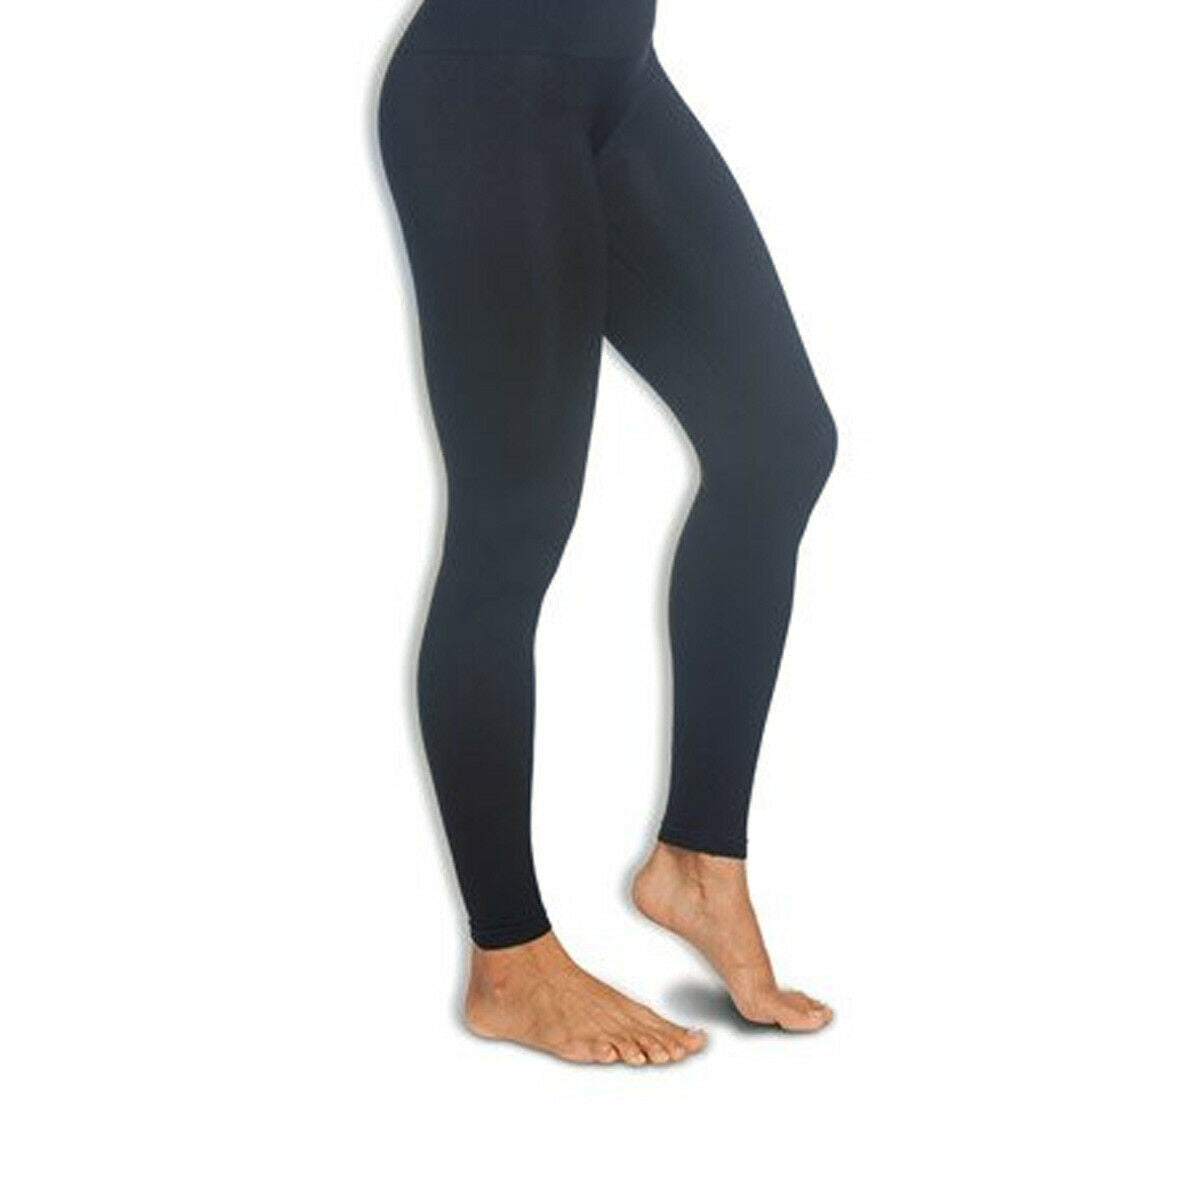 3 Pack) Genie Slim and Tone Leggings - Charcoal - Large – SharpPrices